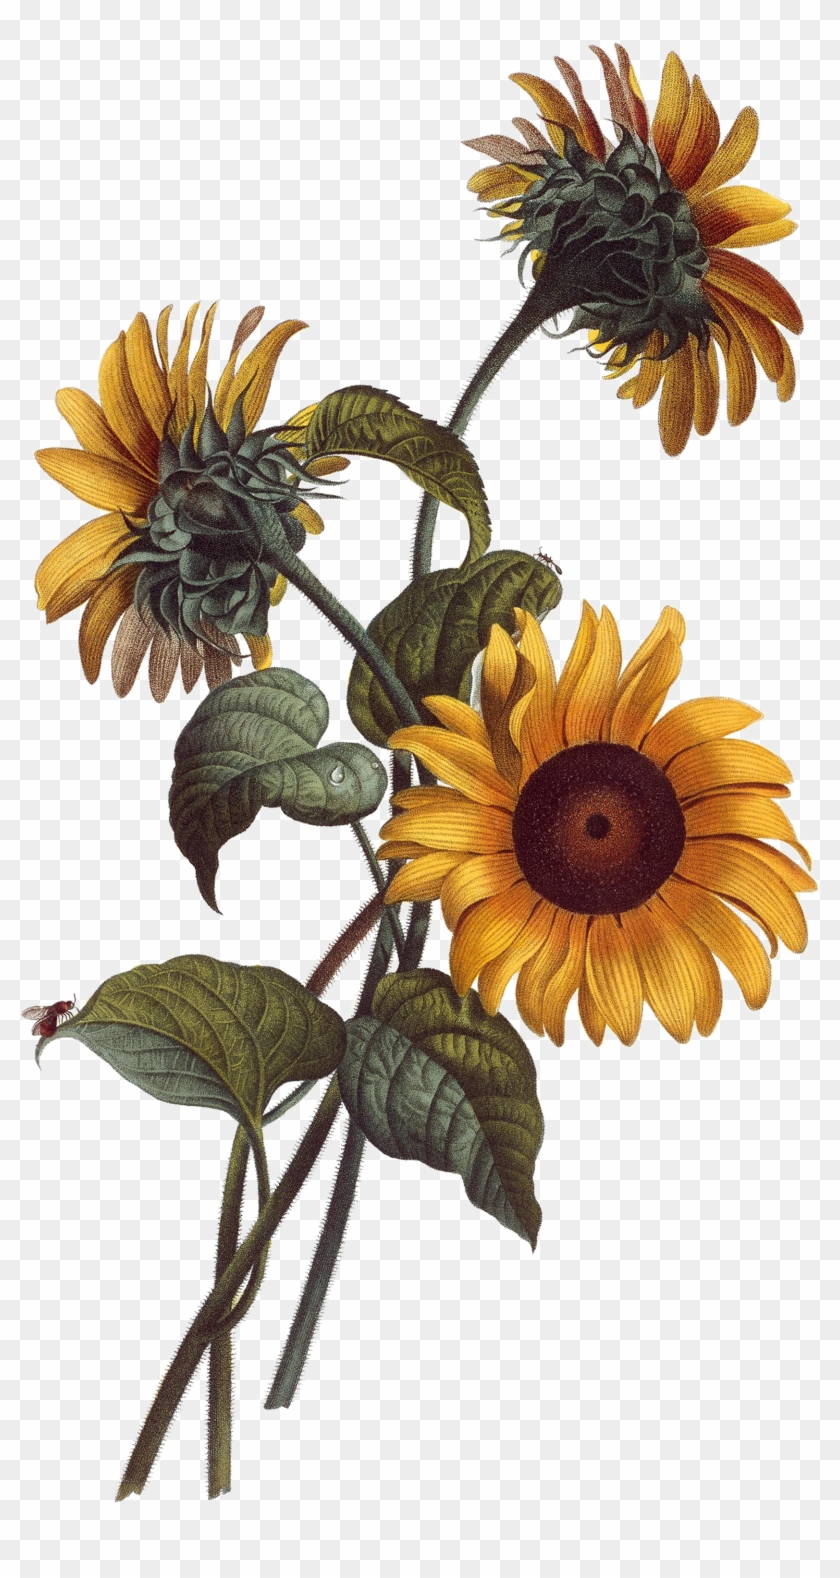 Common Sunflower Watercolor Painting Drawing Botanical - Sunflower Illustration #273327